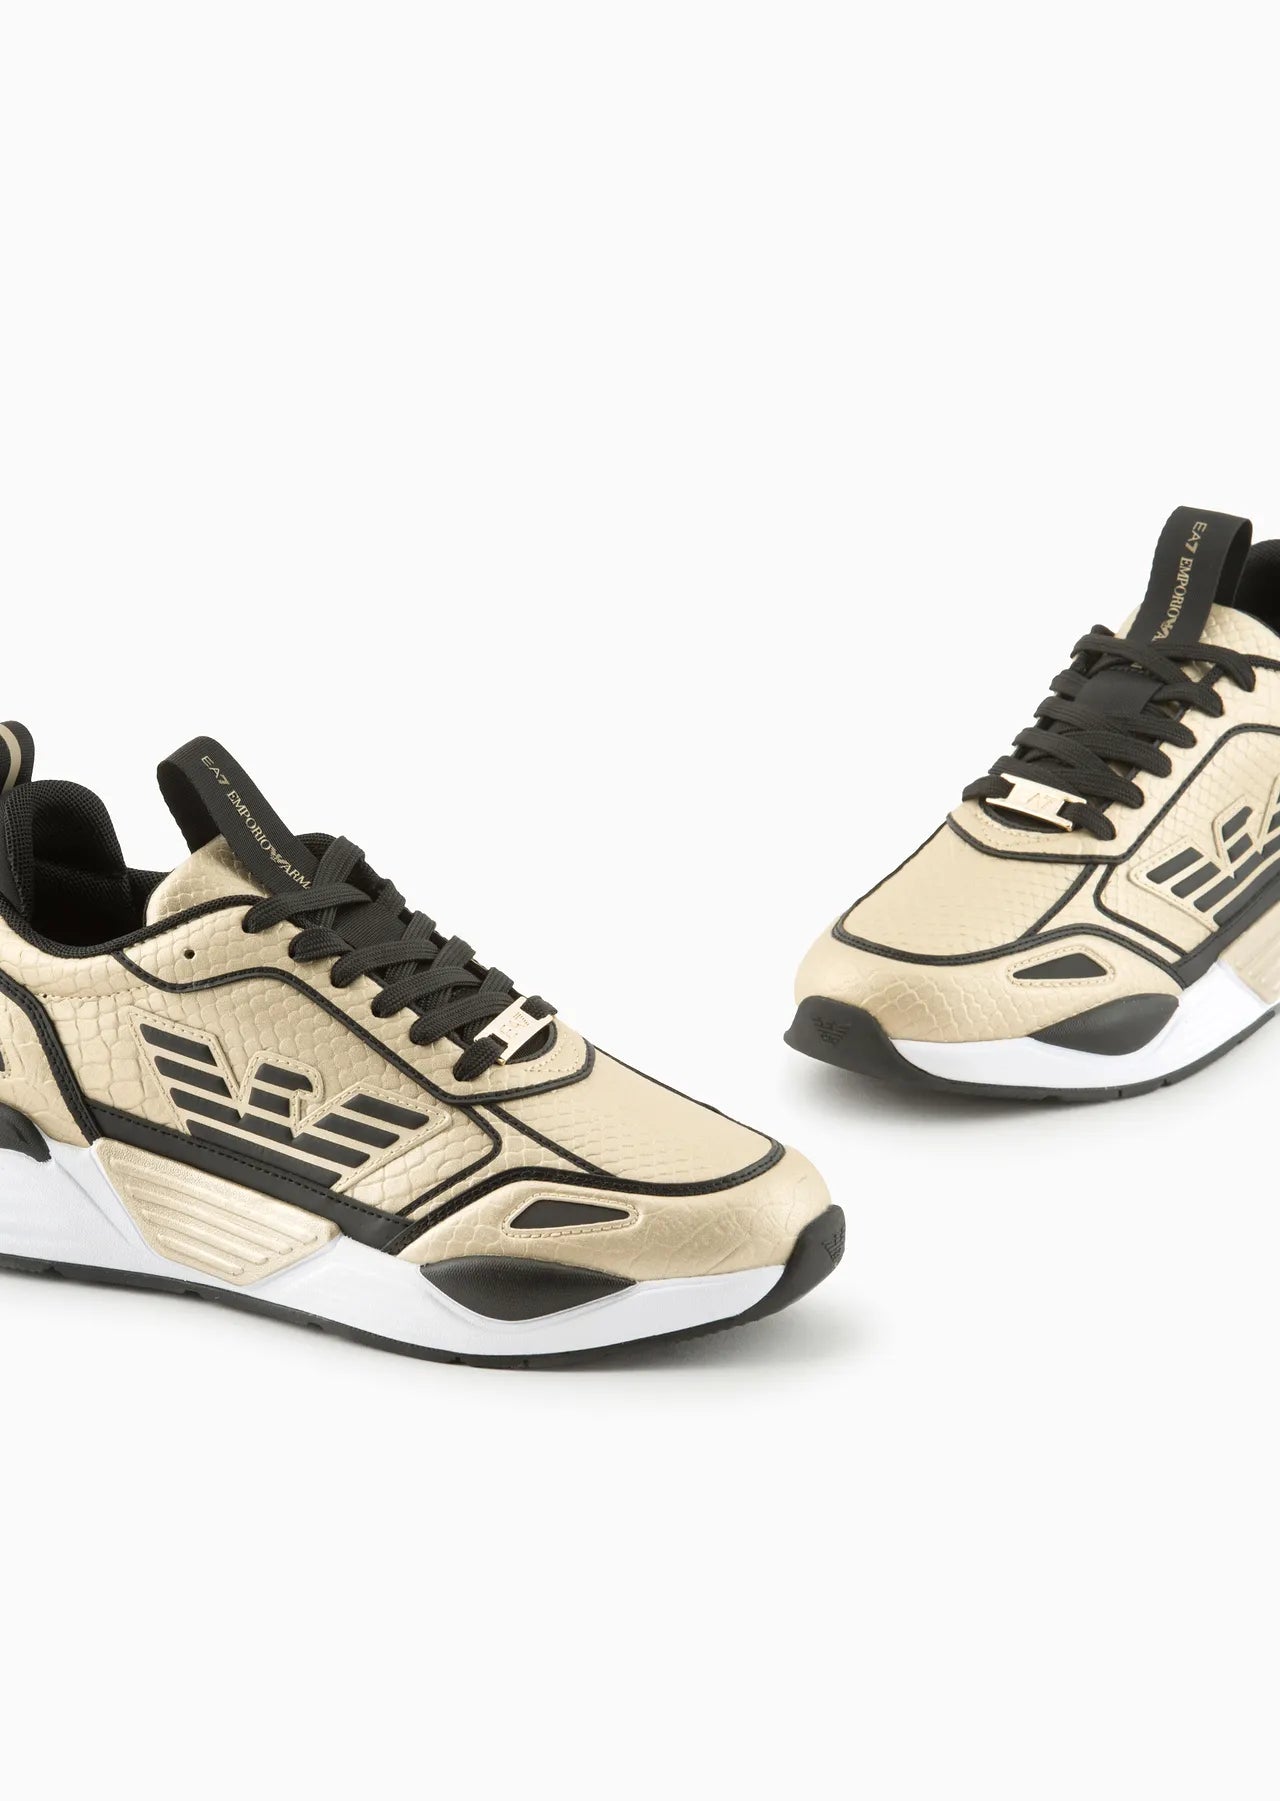 Ace Runner Python sneakers